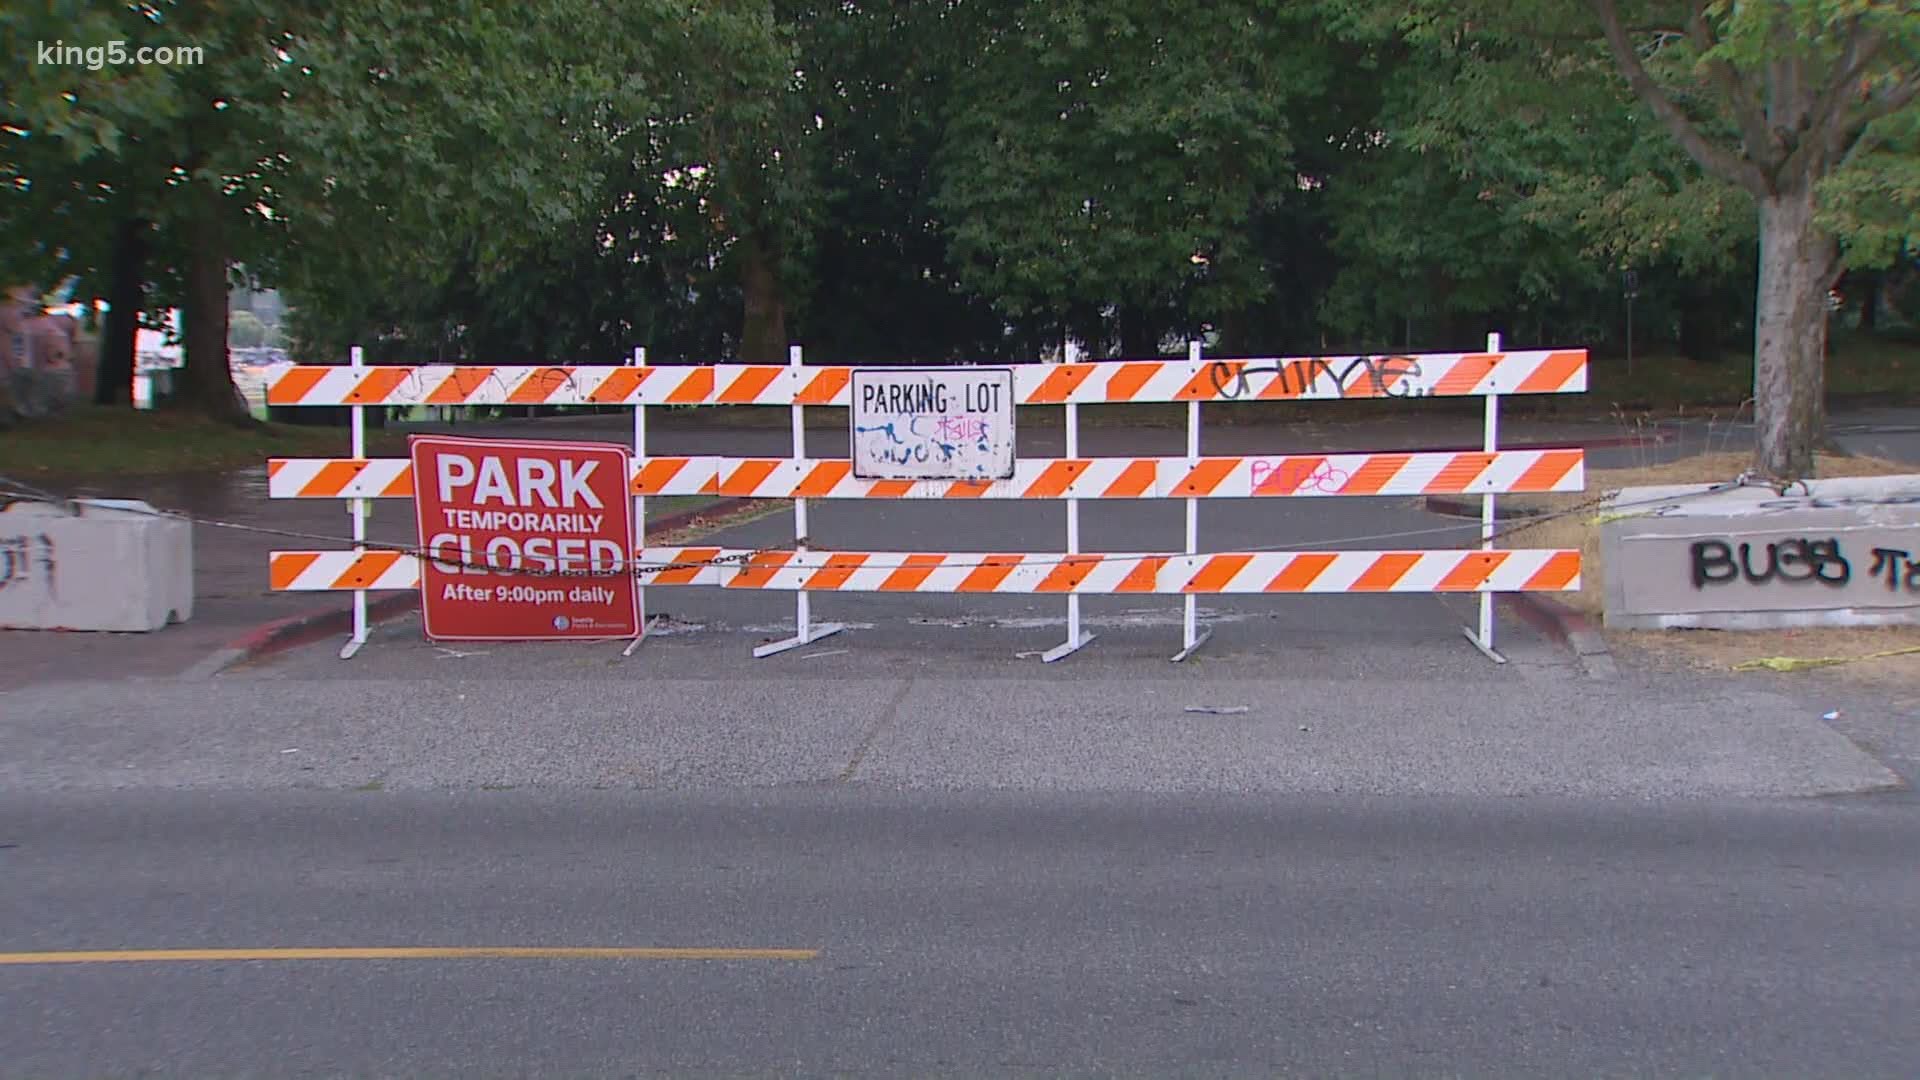 Seattle's Gas Works Park was closed ahead of a prayer rally planned for Labor Day.